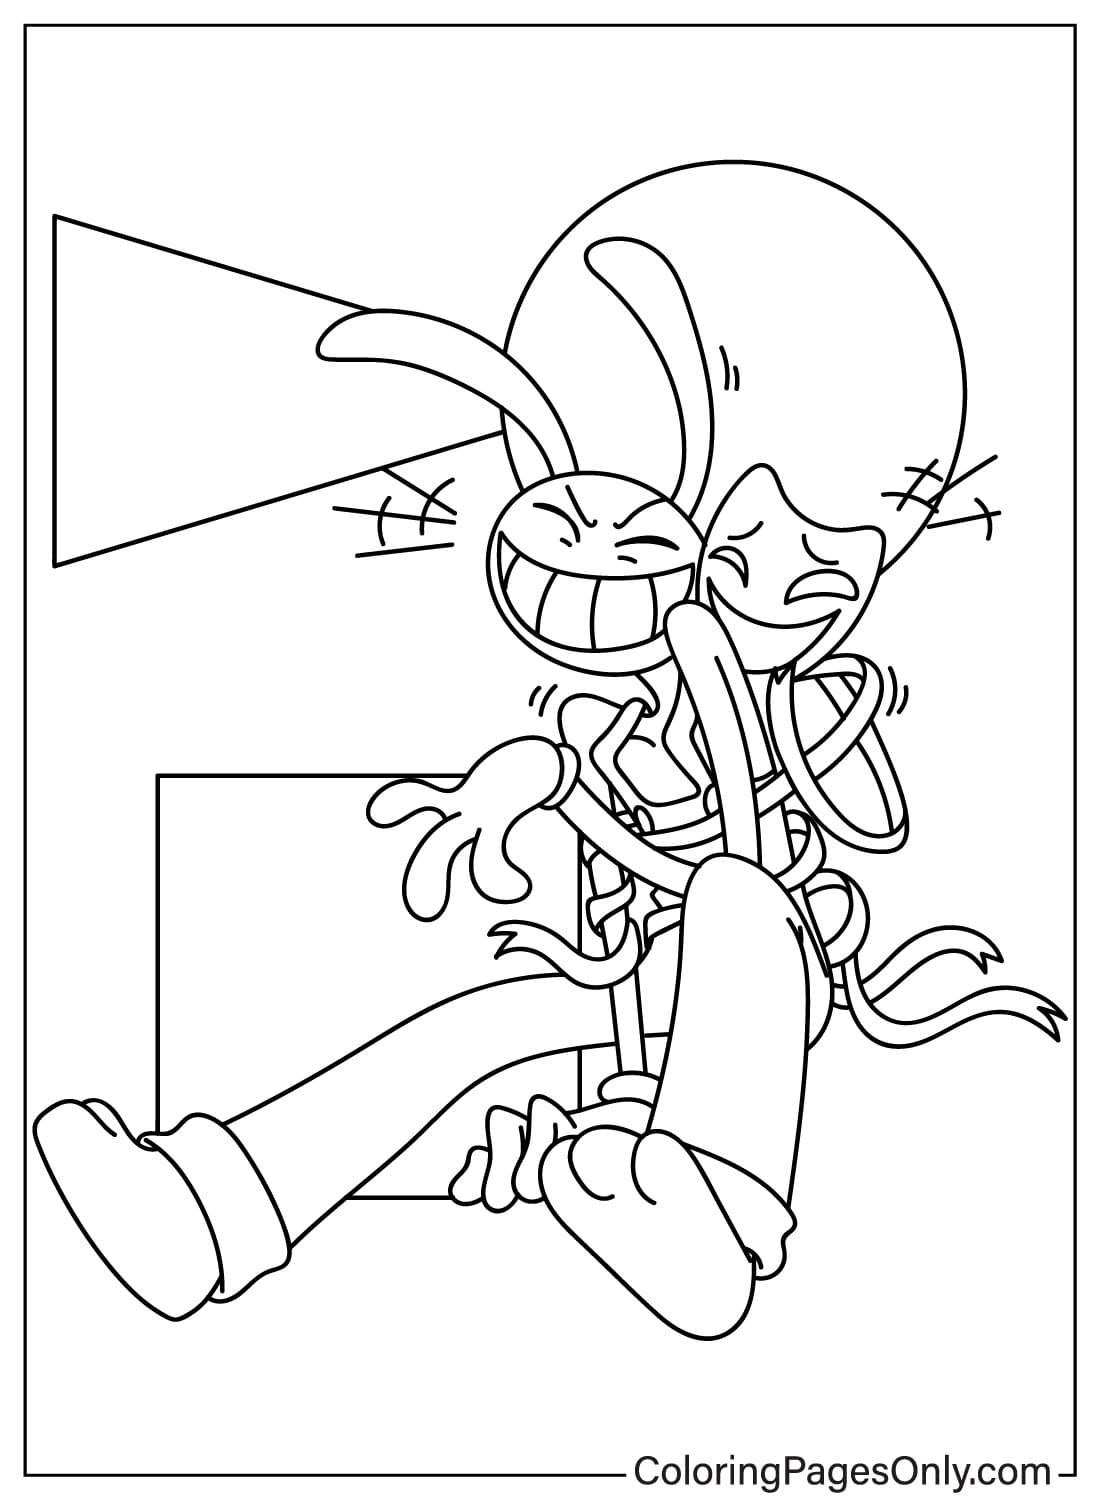 Jax, Gangle Coloring Page Printable from Jax